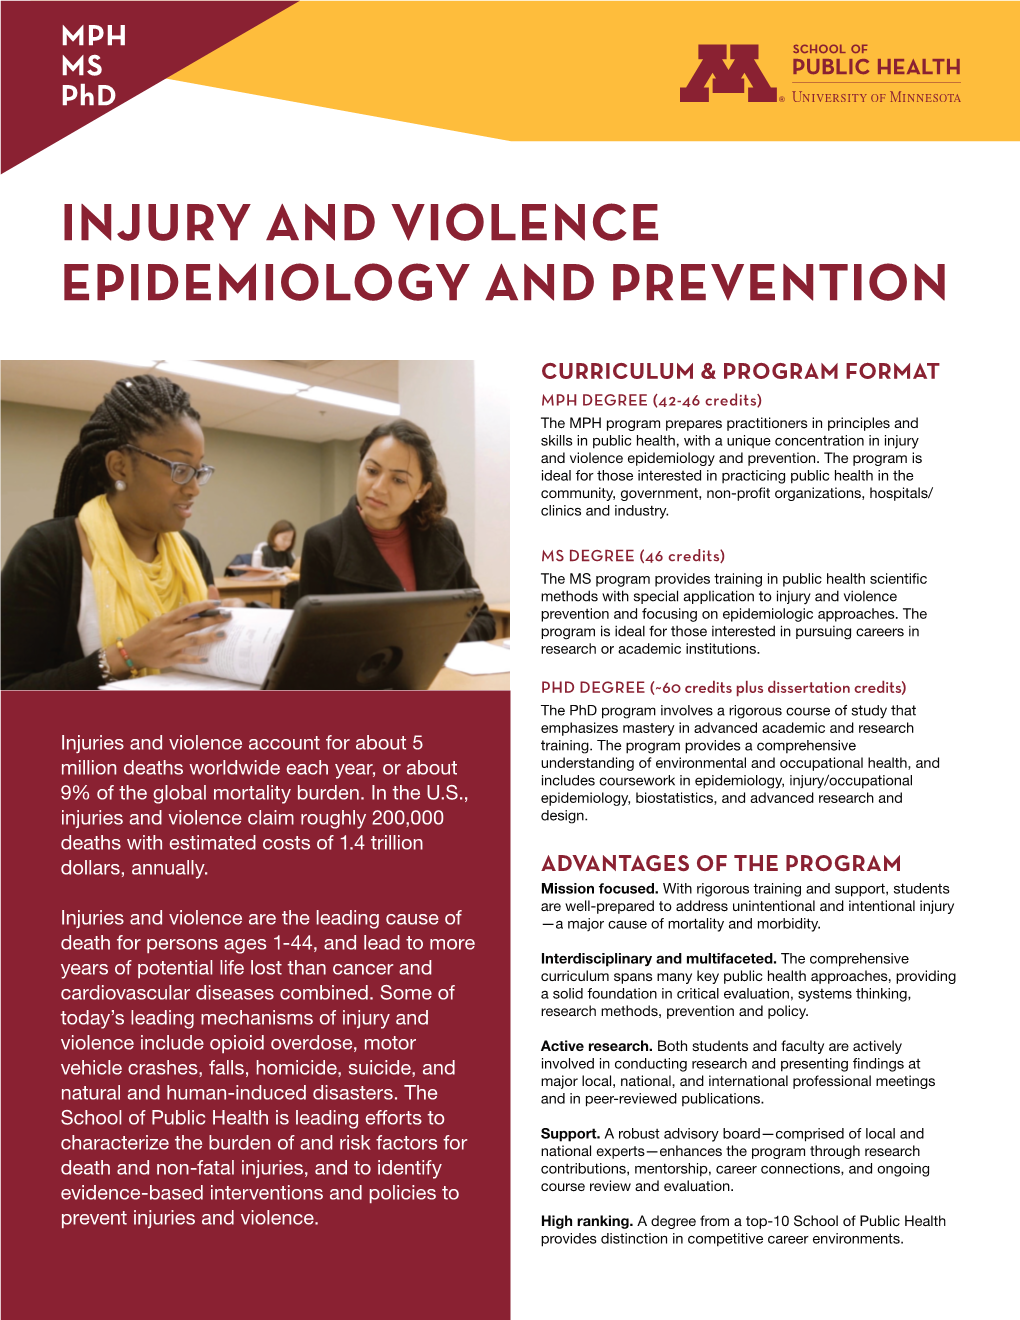 Injury and Violence Epidemiology and Prevention